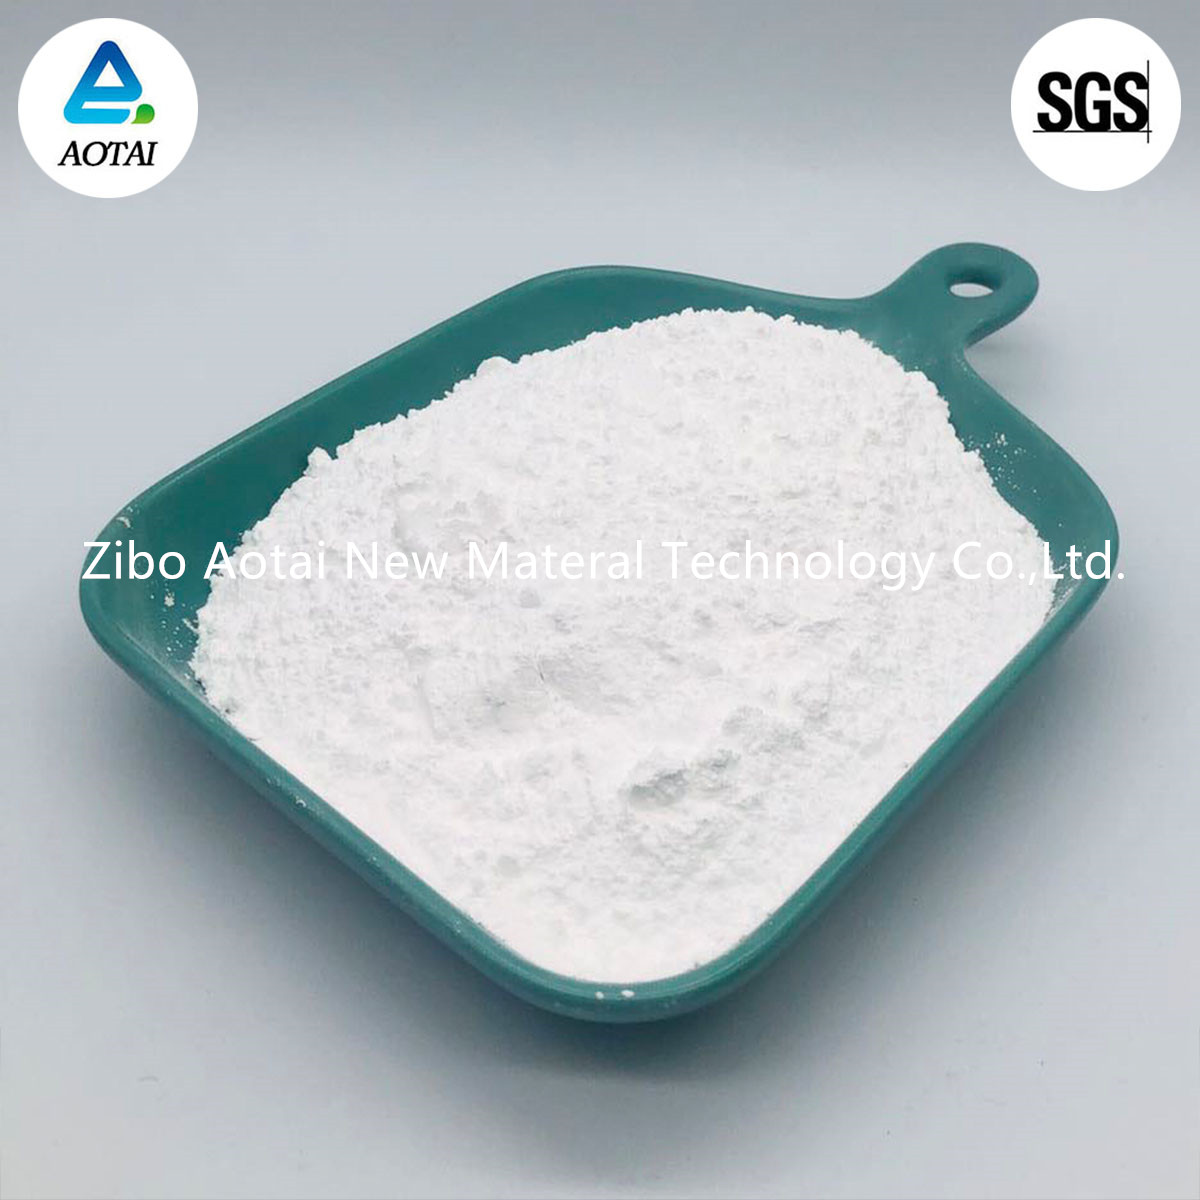 The Extensive Usage of Aluminium Hydroxide